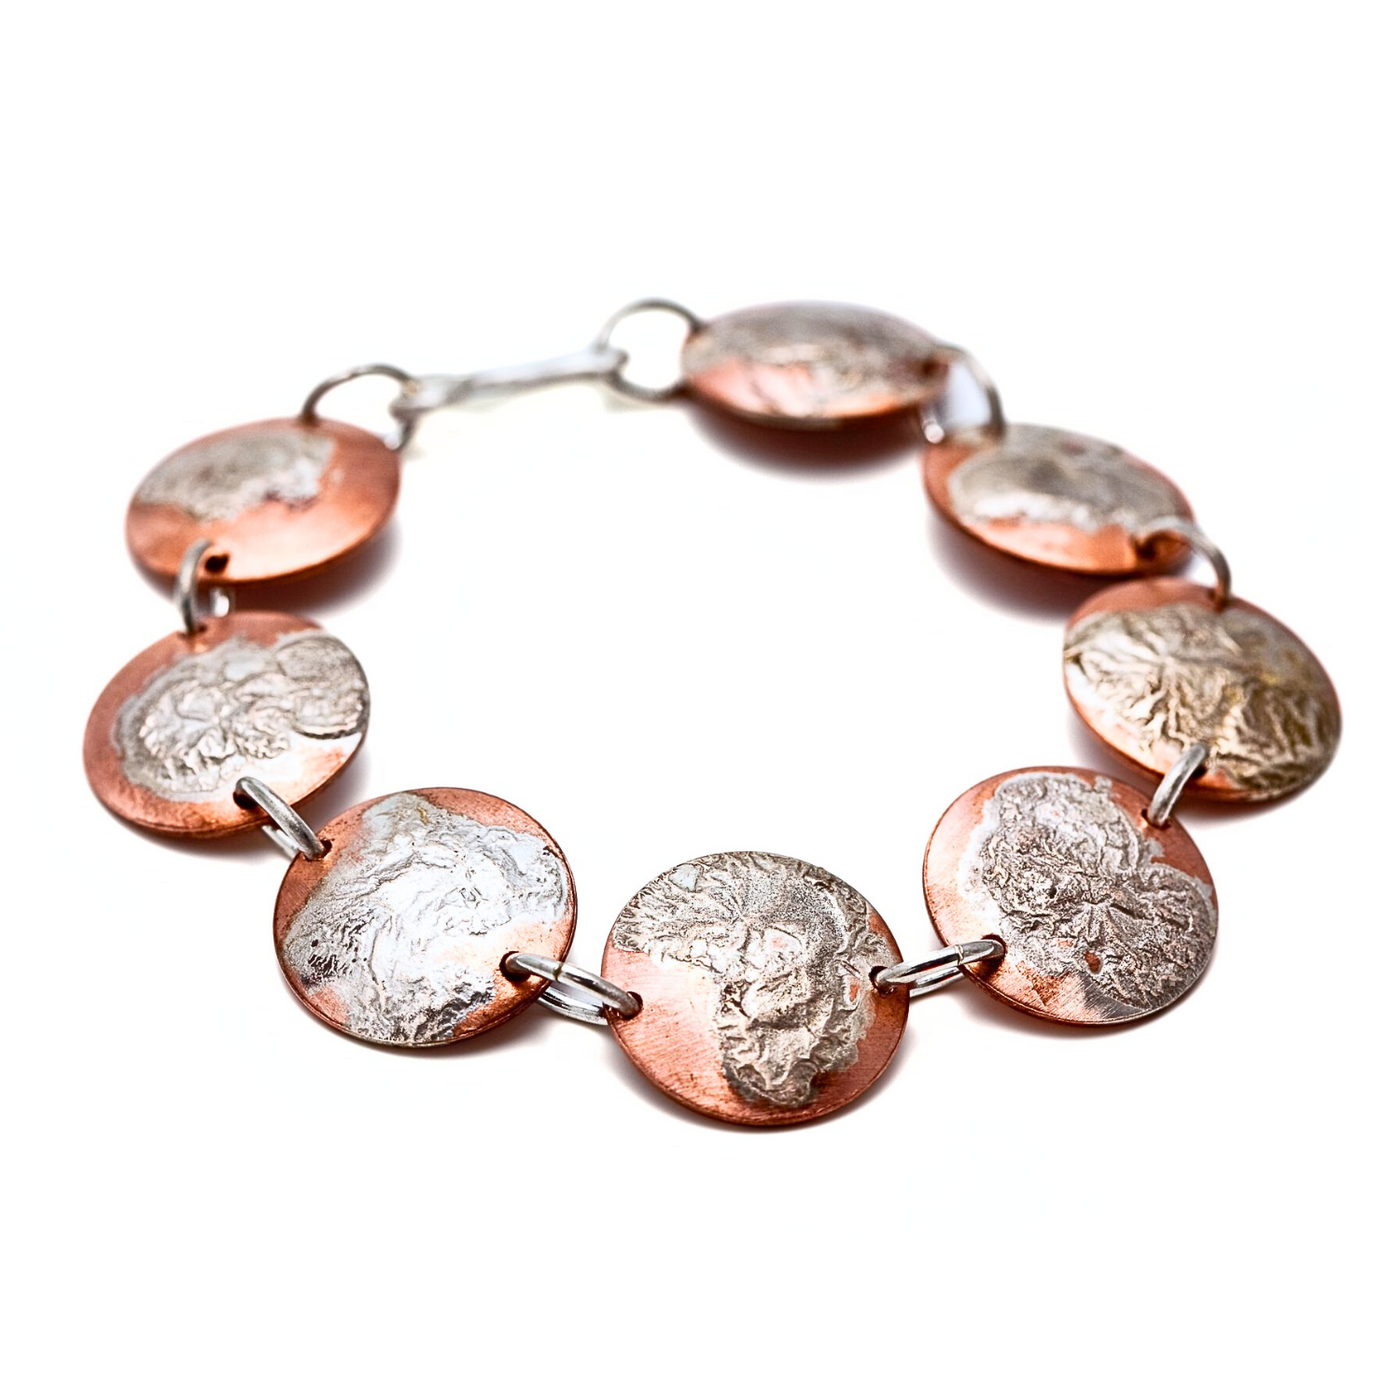 NEW CLASS! Reticulated Sterling Link Bracelet January 20, 2-5pm